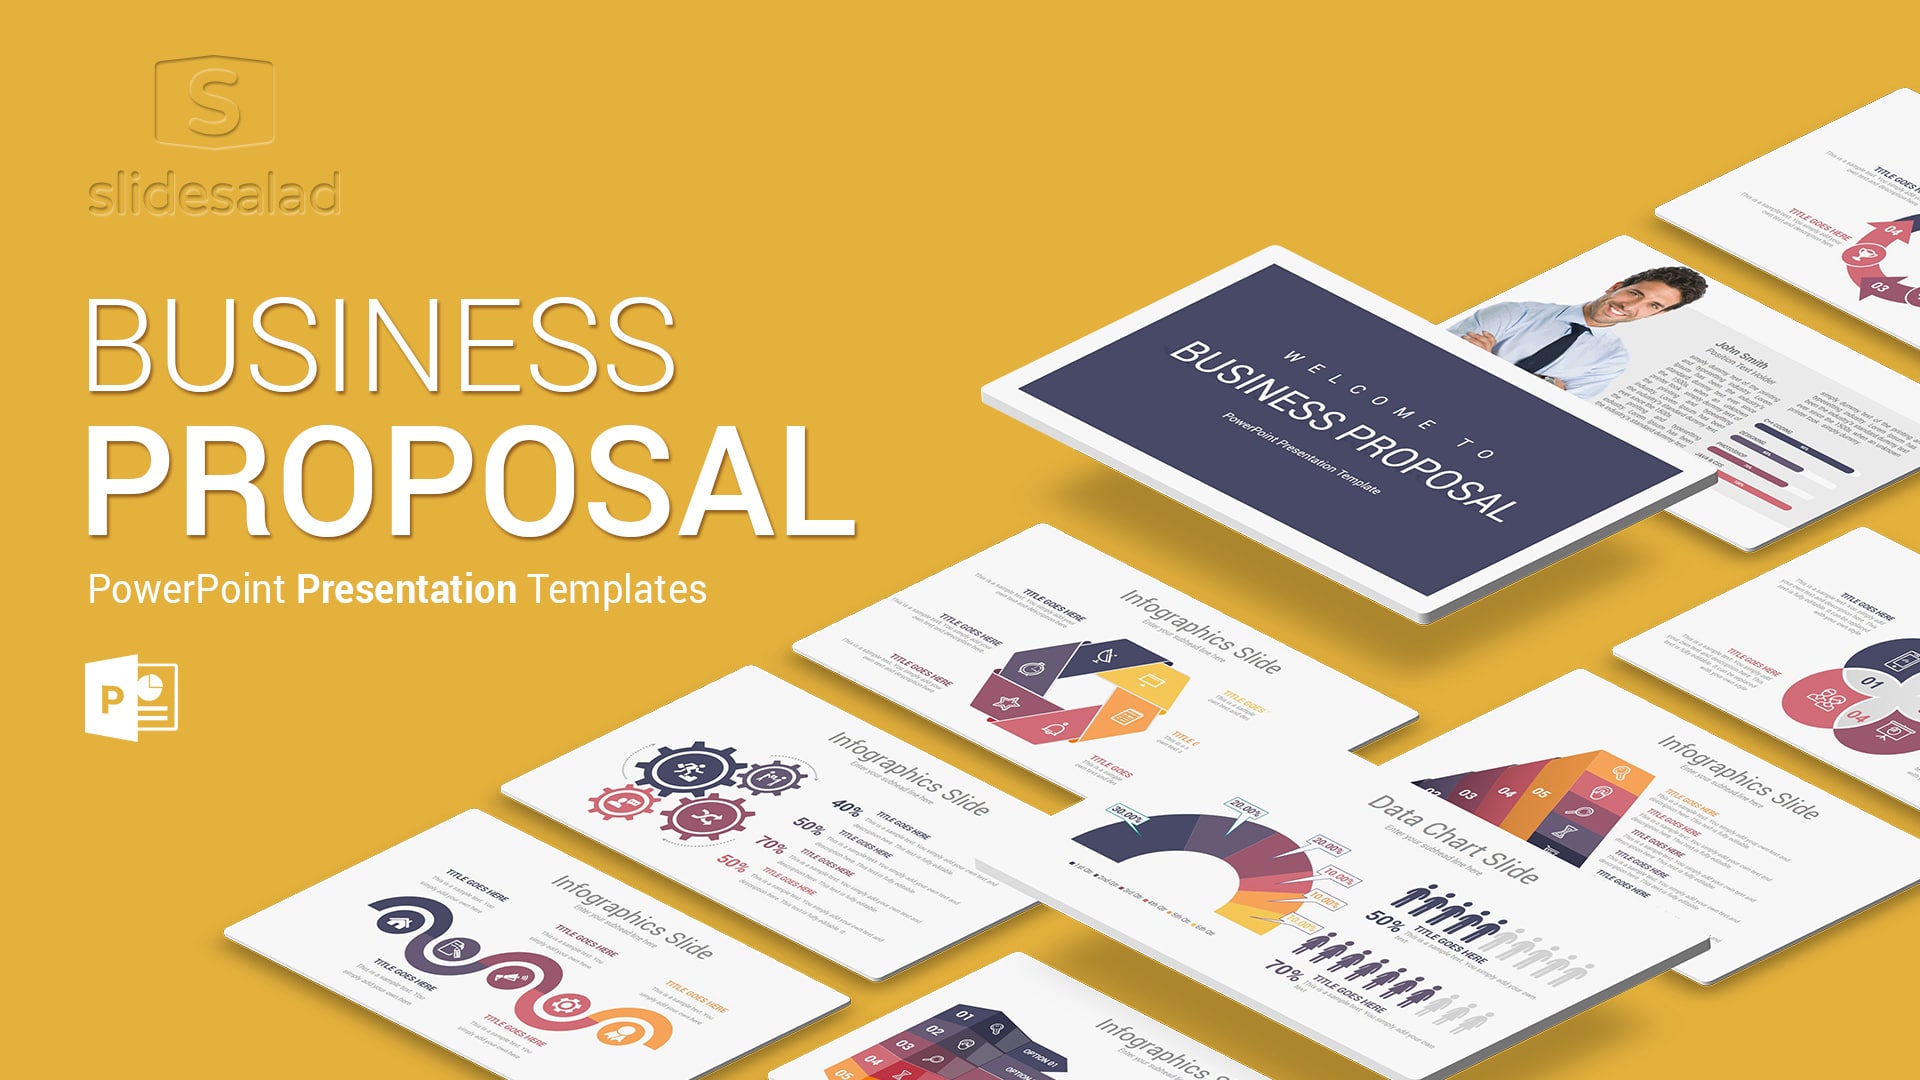 Business Proposal PowerPoint Presentation Template